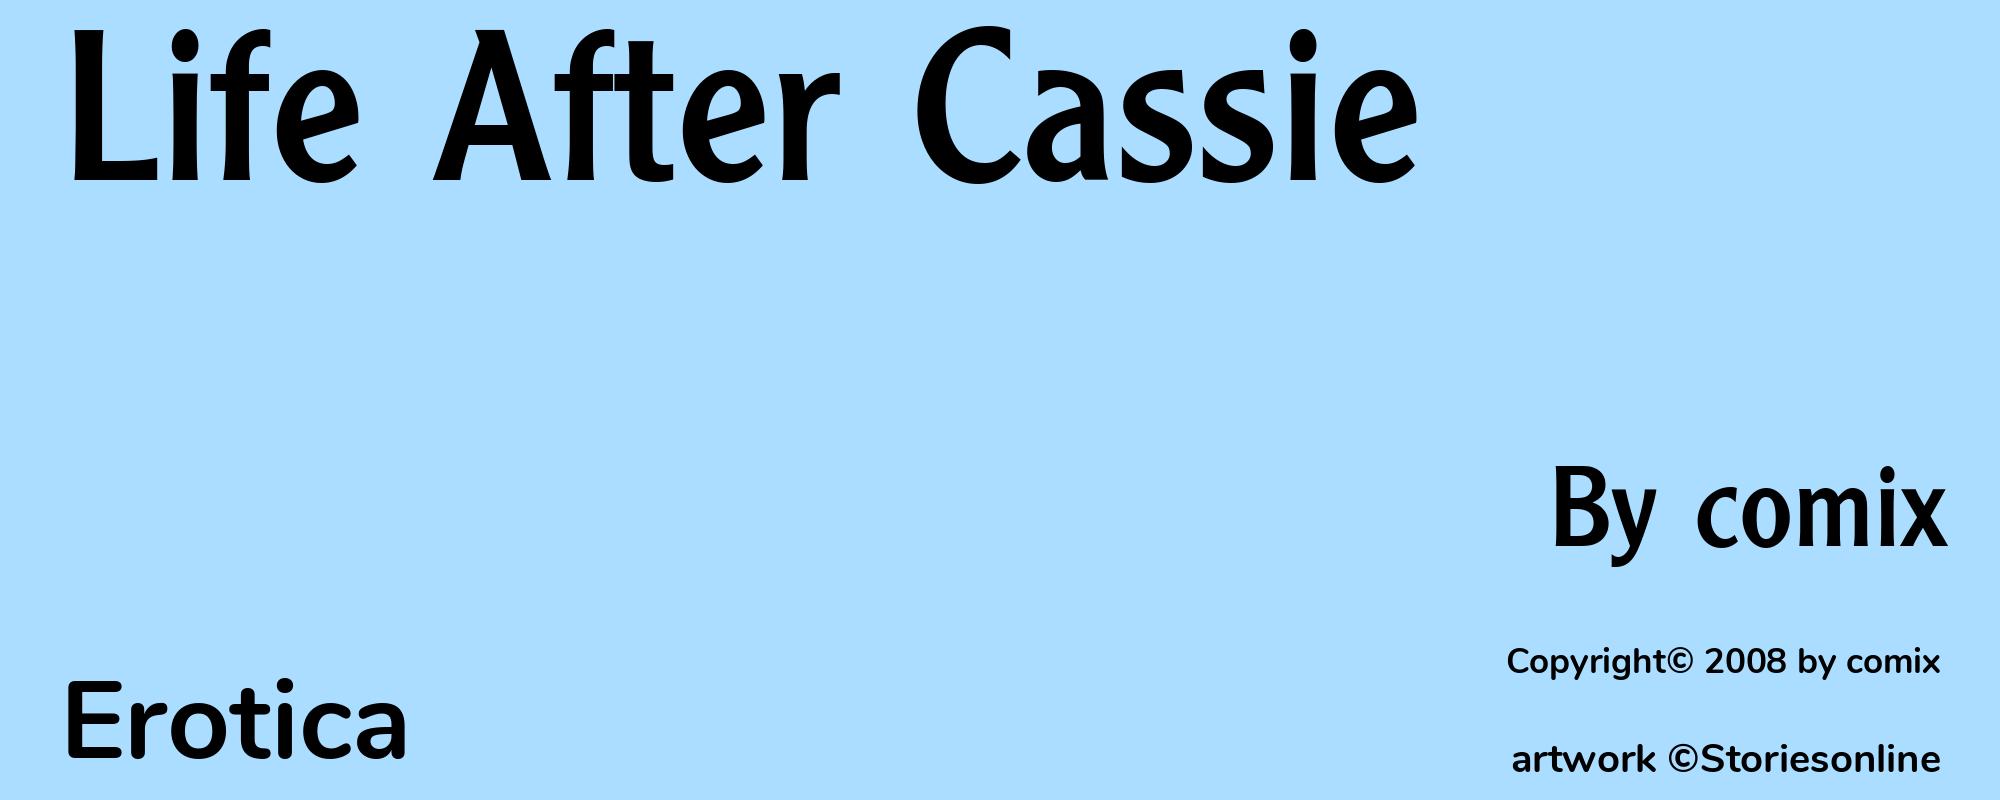 Life After Cassie - Cover